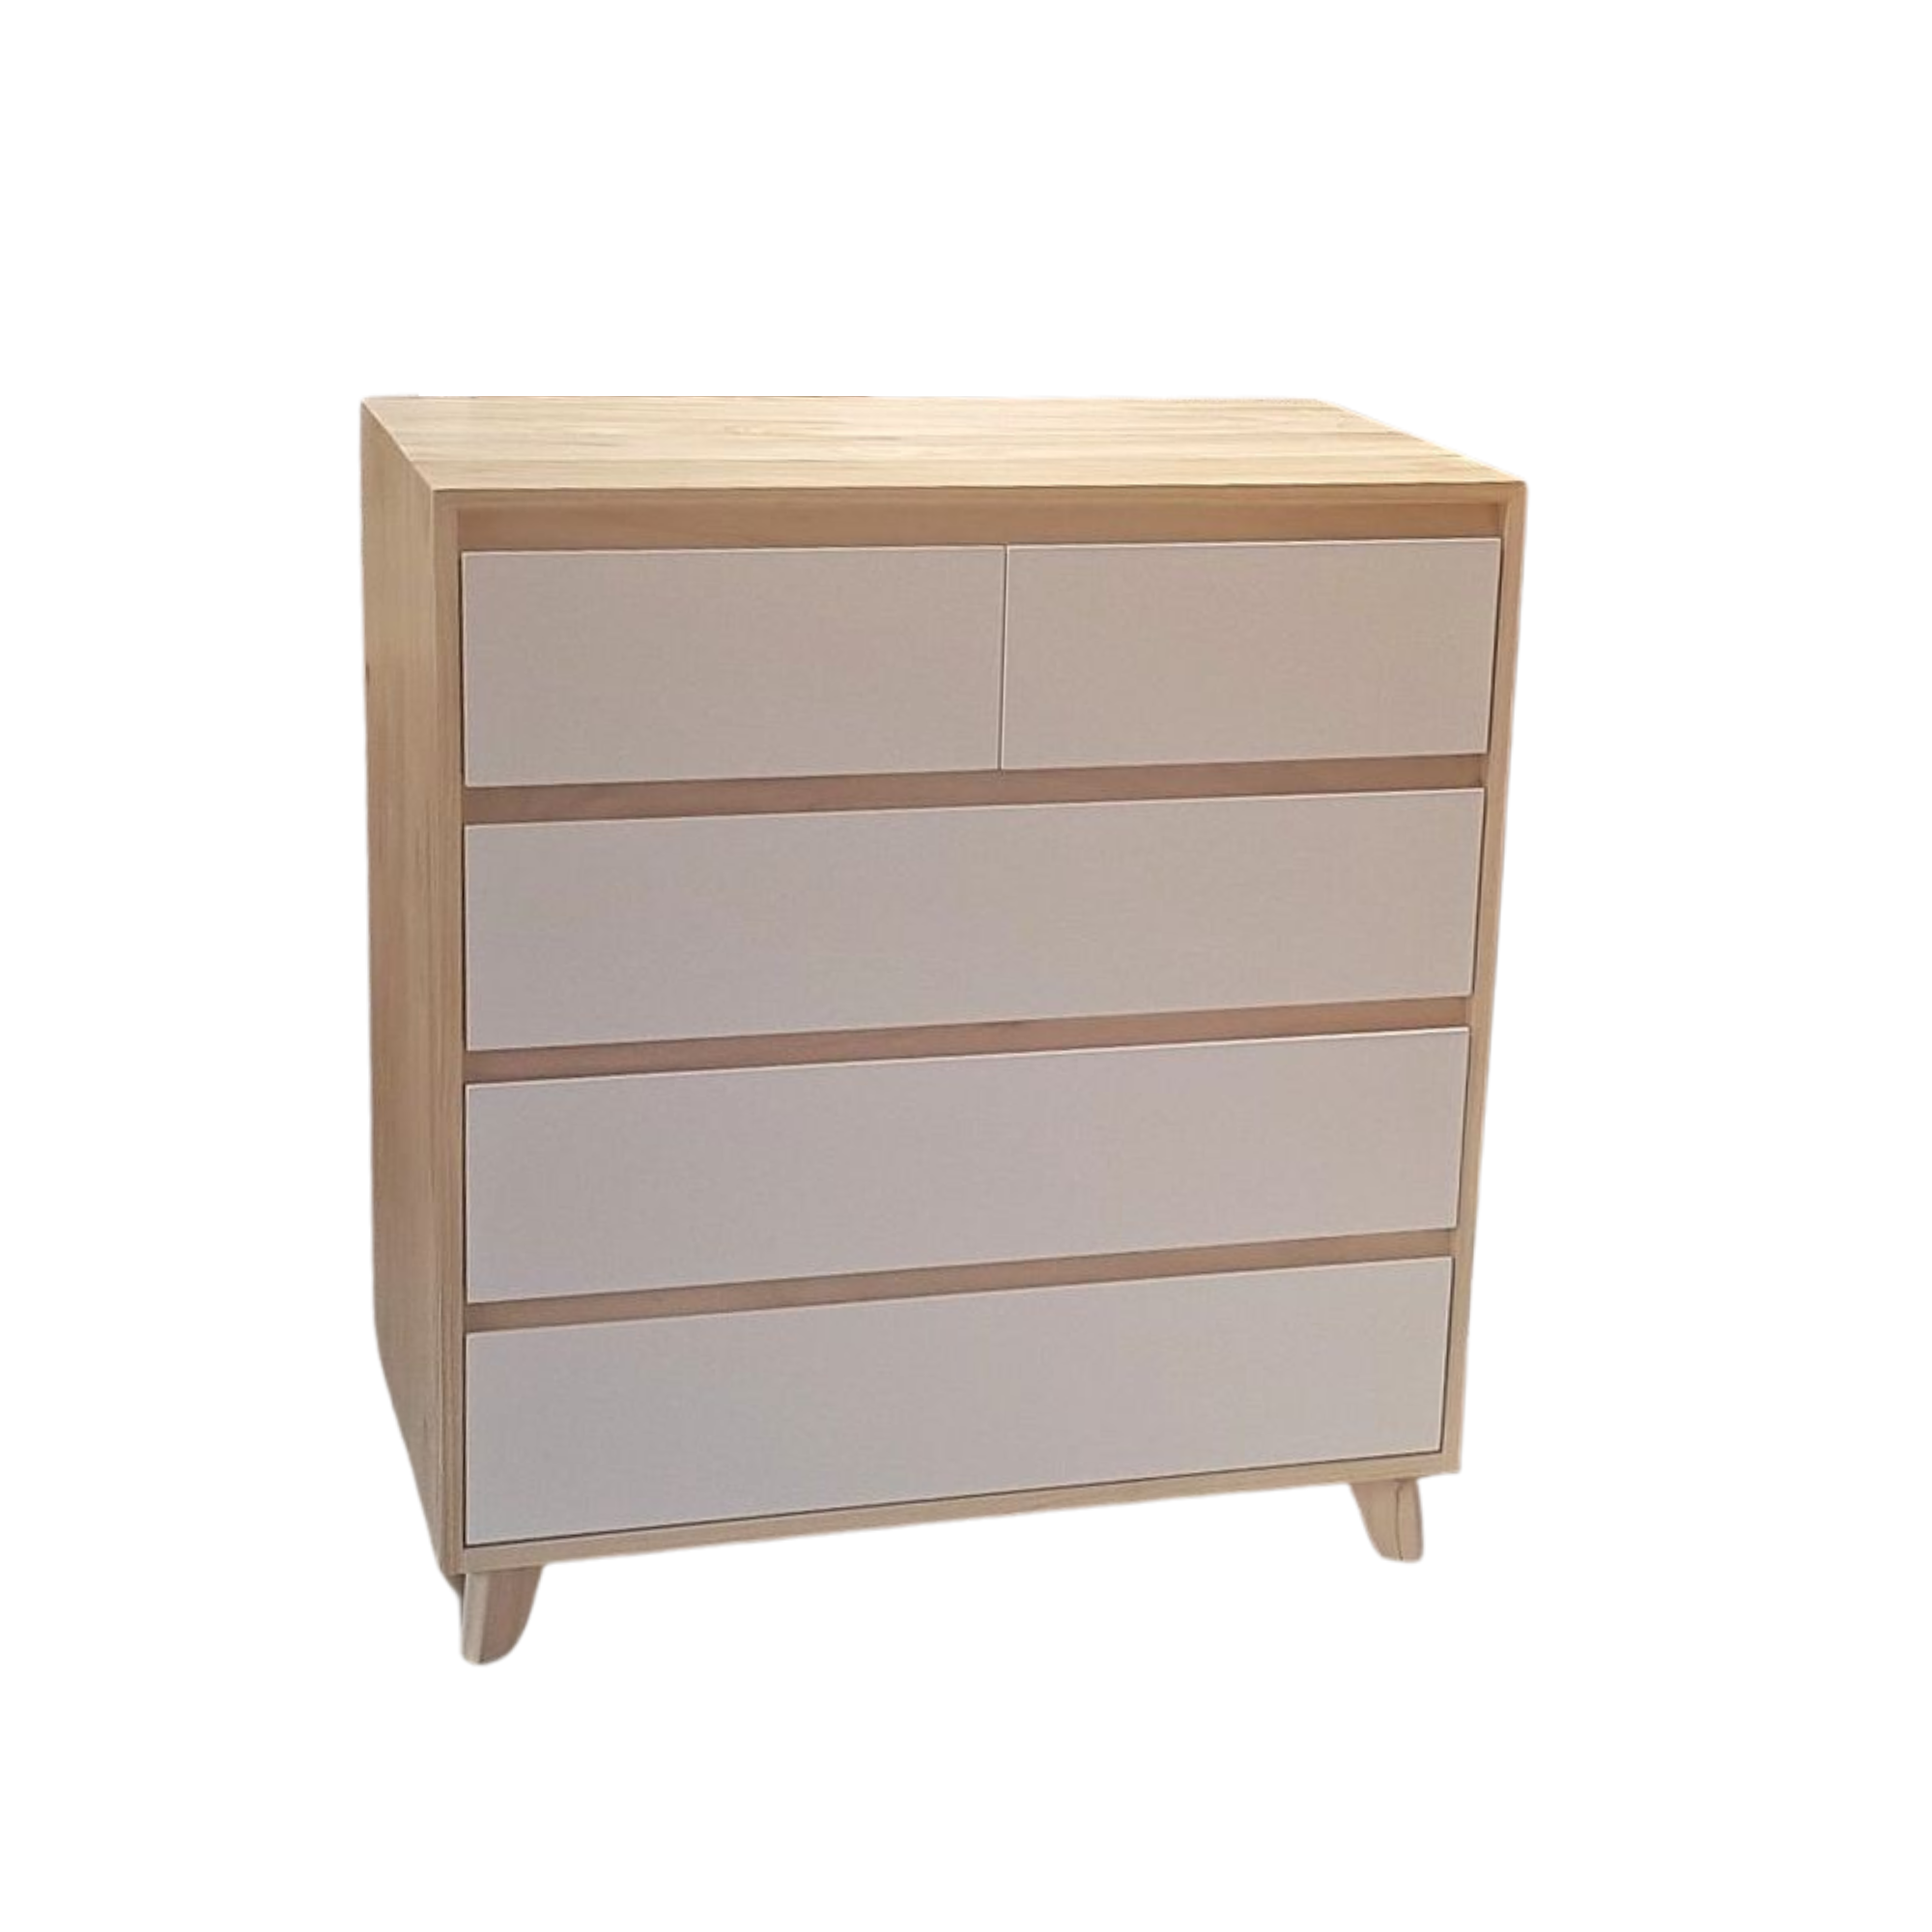 BRIMAR SOLID TIMBER 4 DRAWER LOWBOY WITH A DETACHABLE CHANGING TABLE